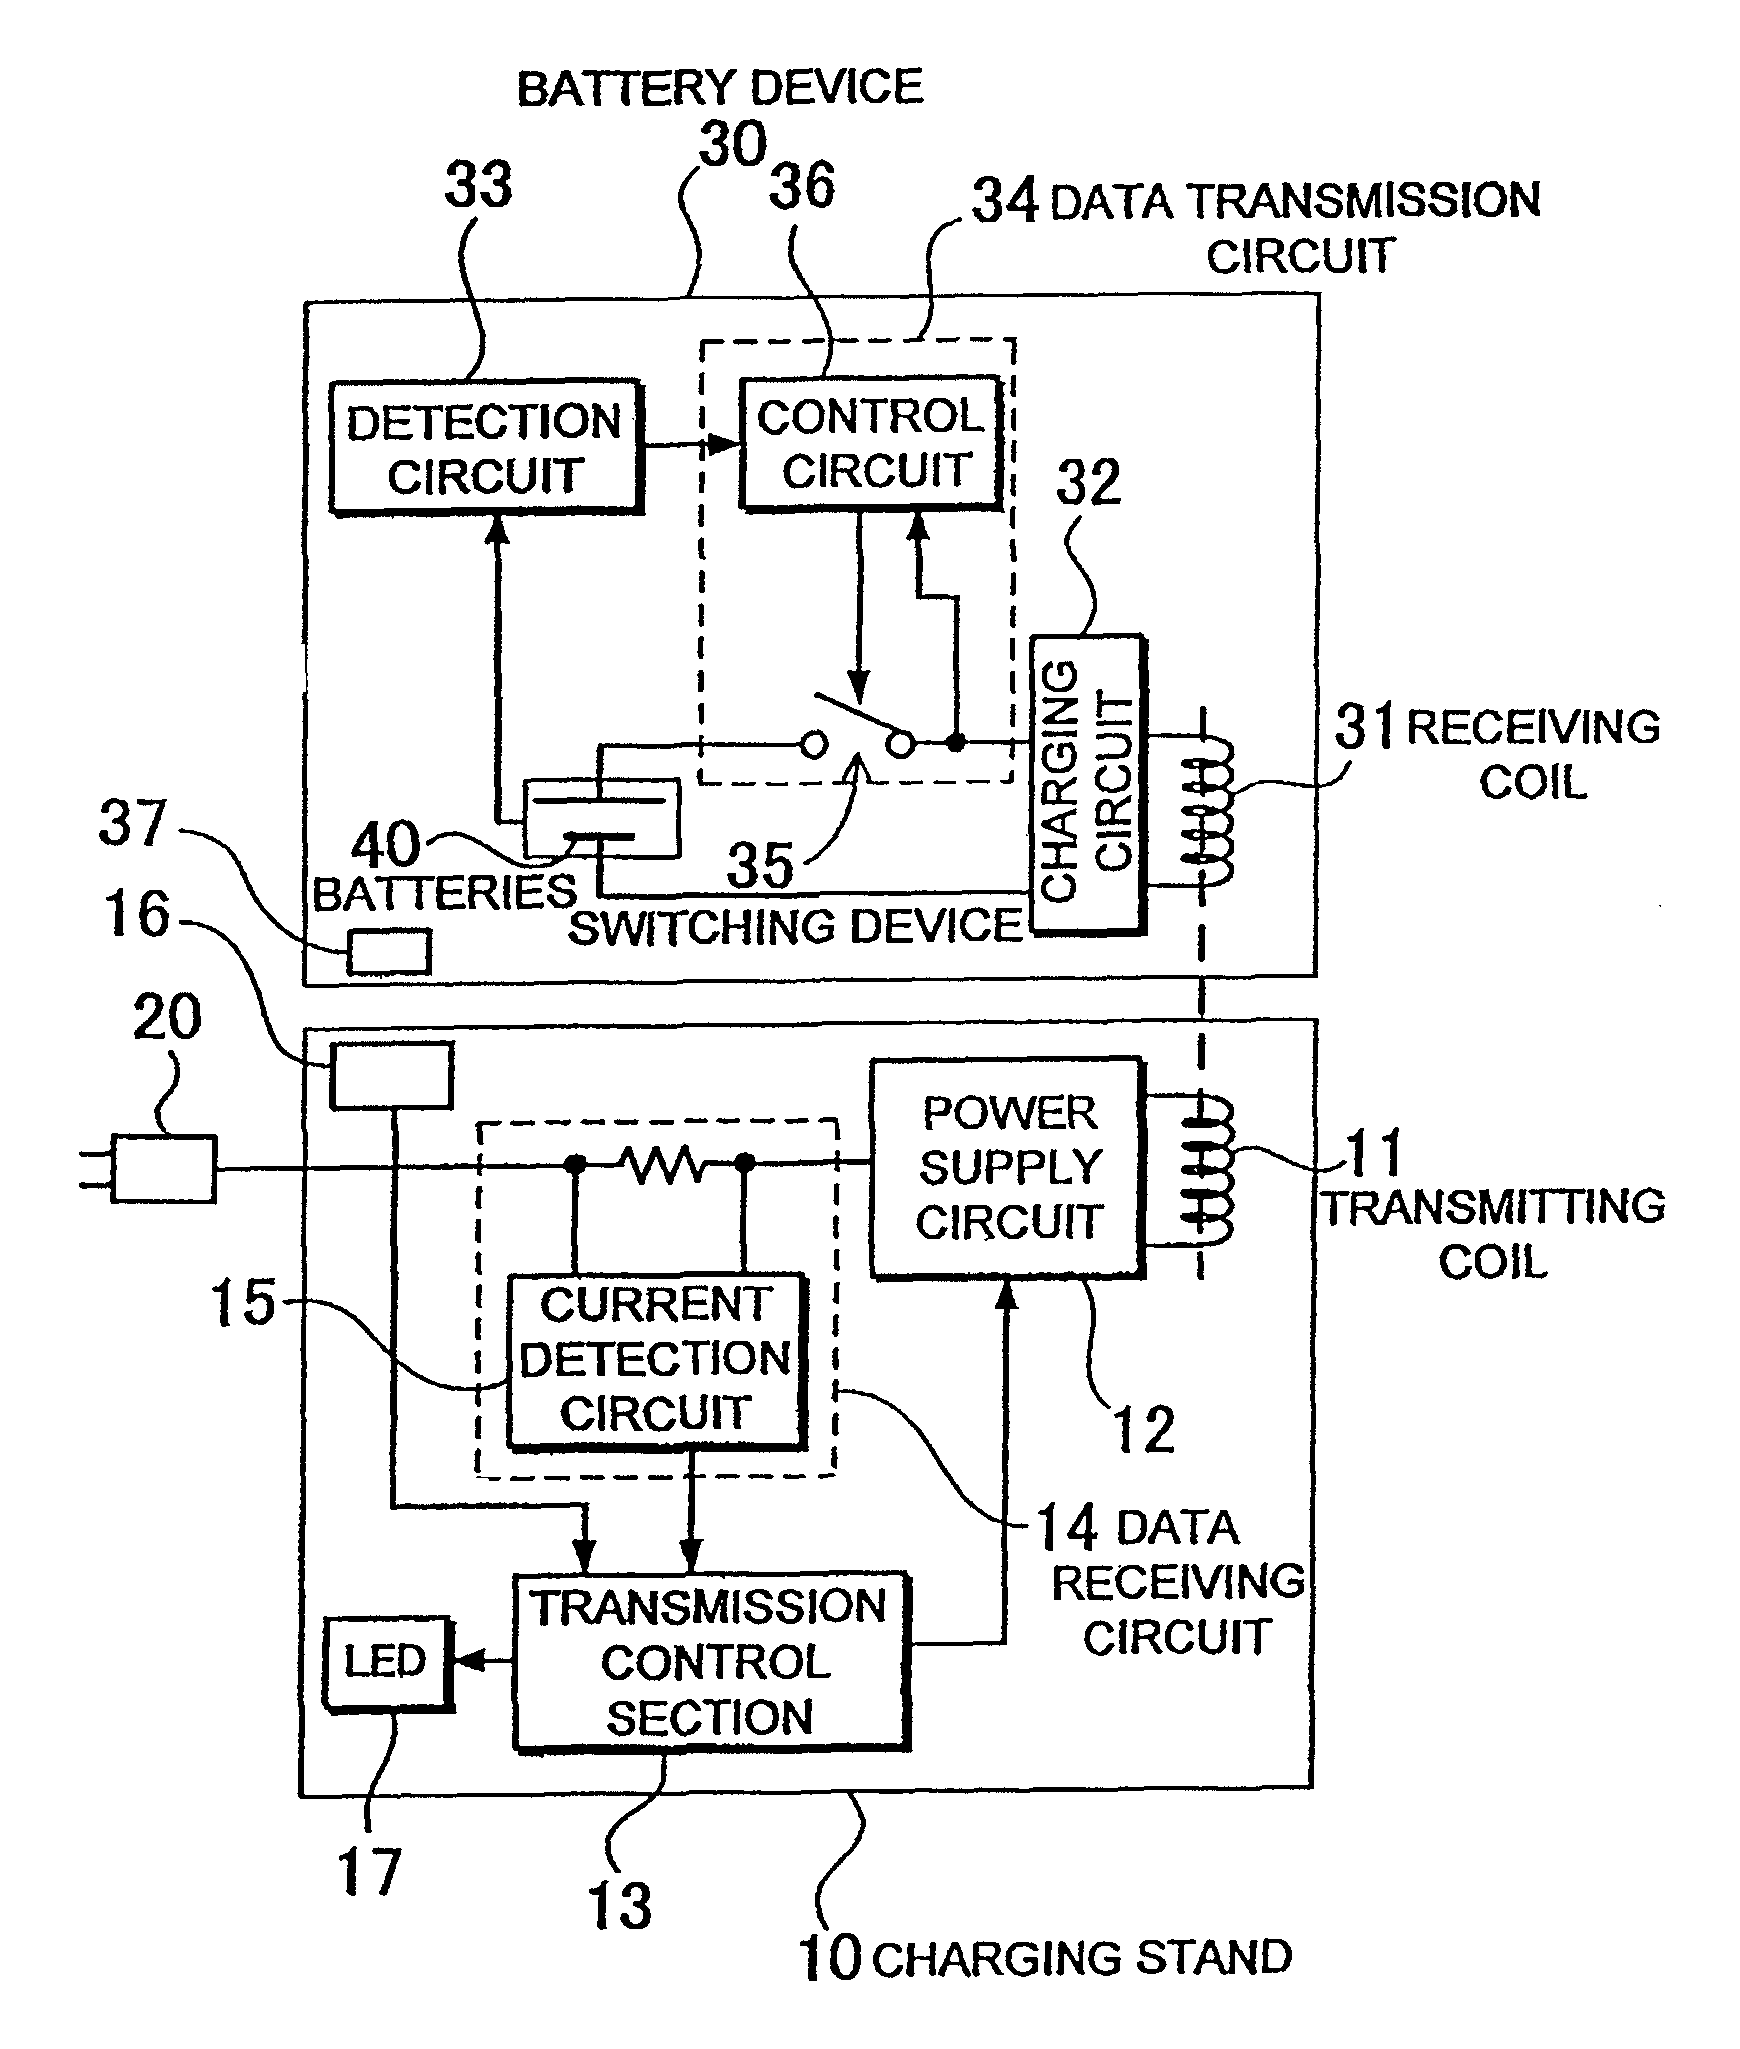 Method of data transmission embedded in electric power transmission and a charging stand and battery device using transmitting coil current change to receive that data transmission